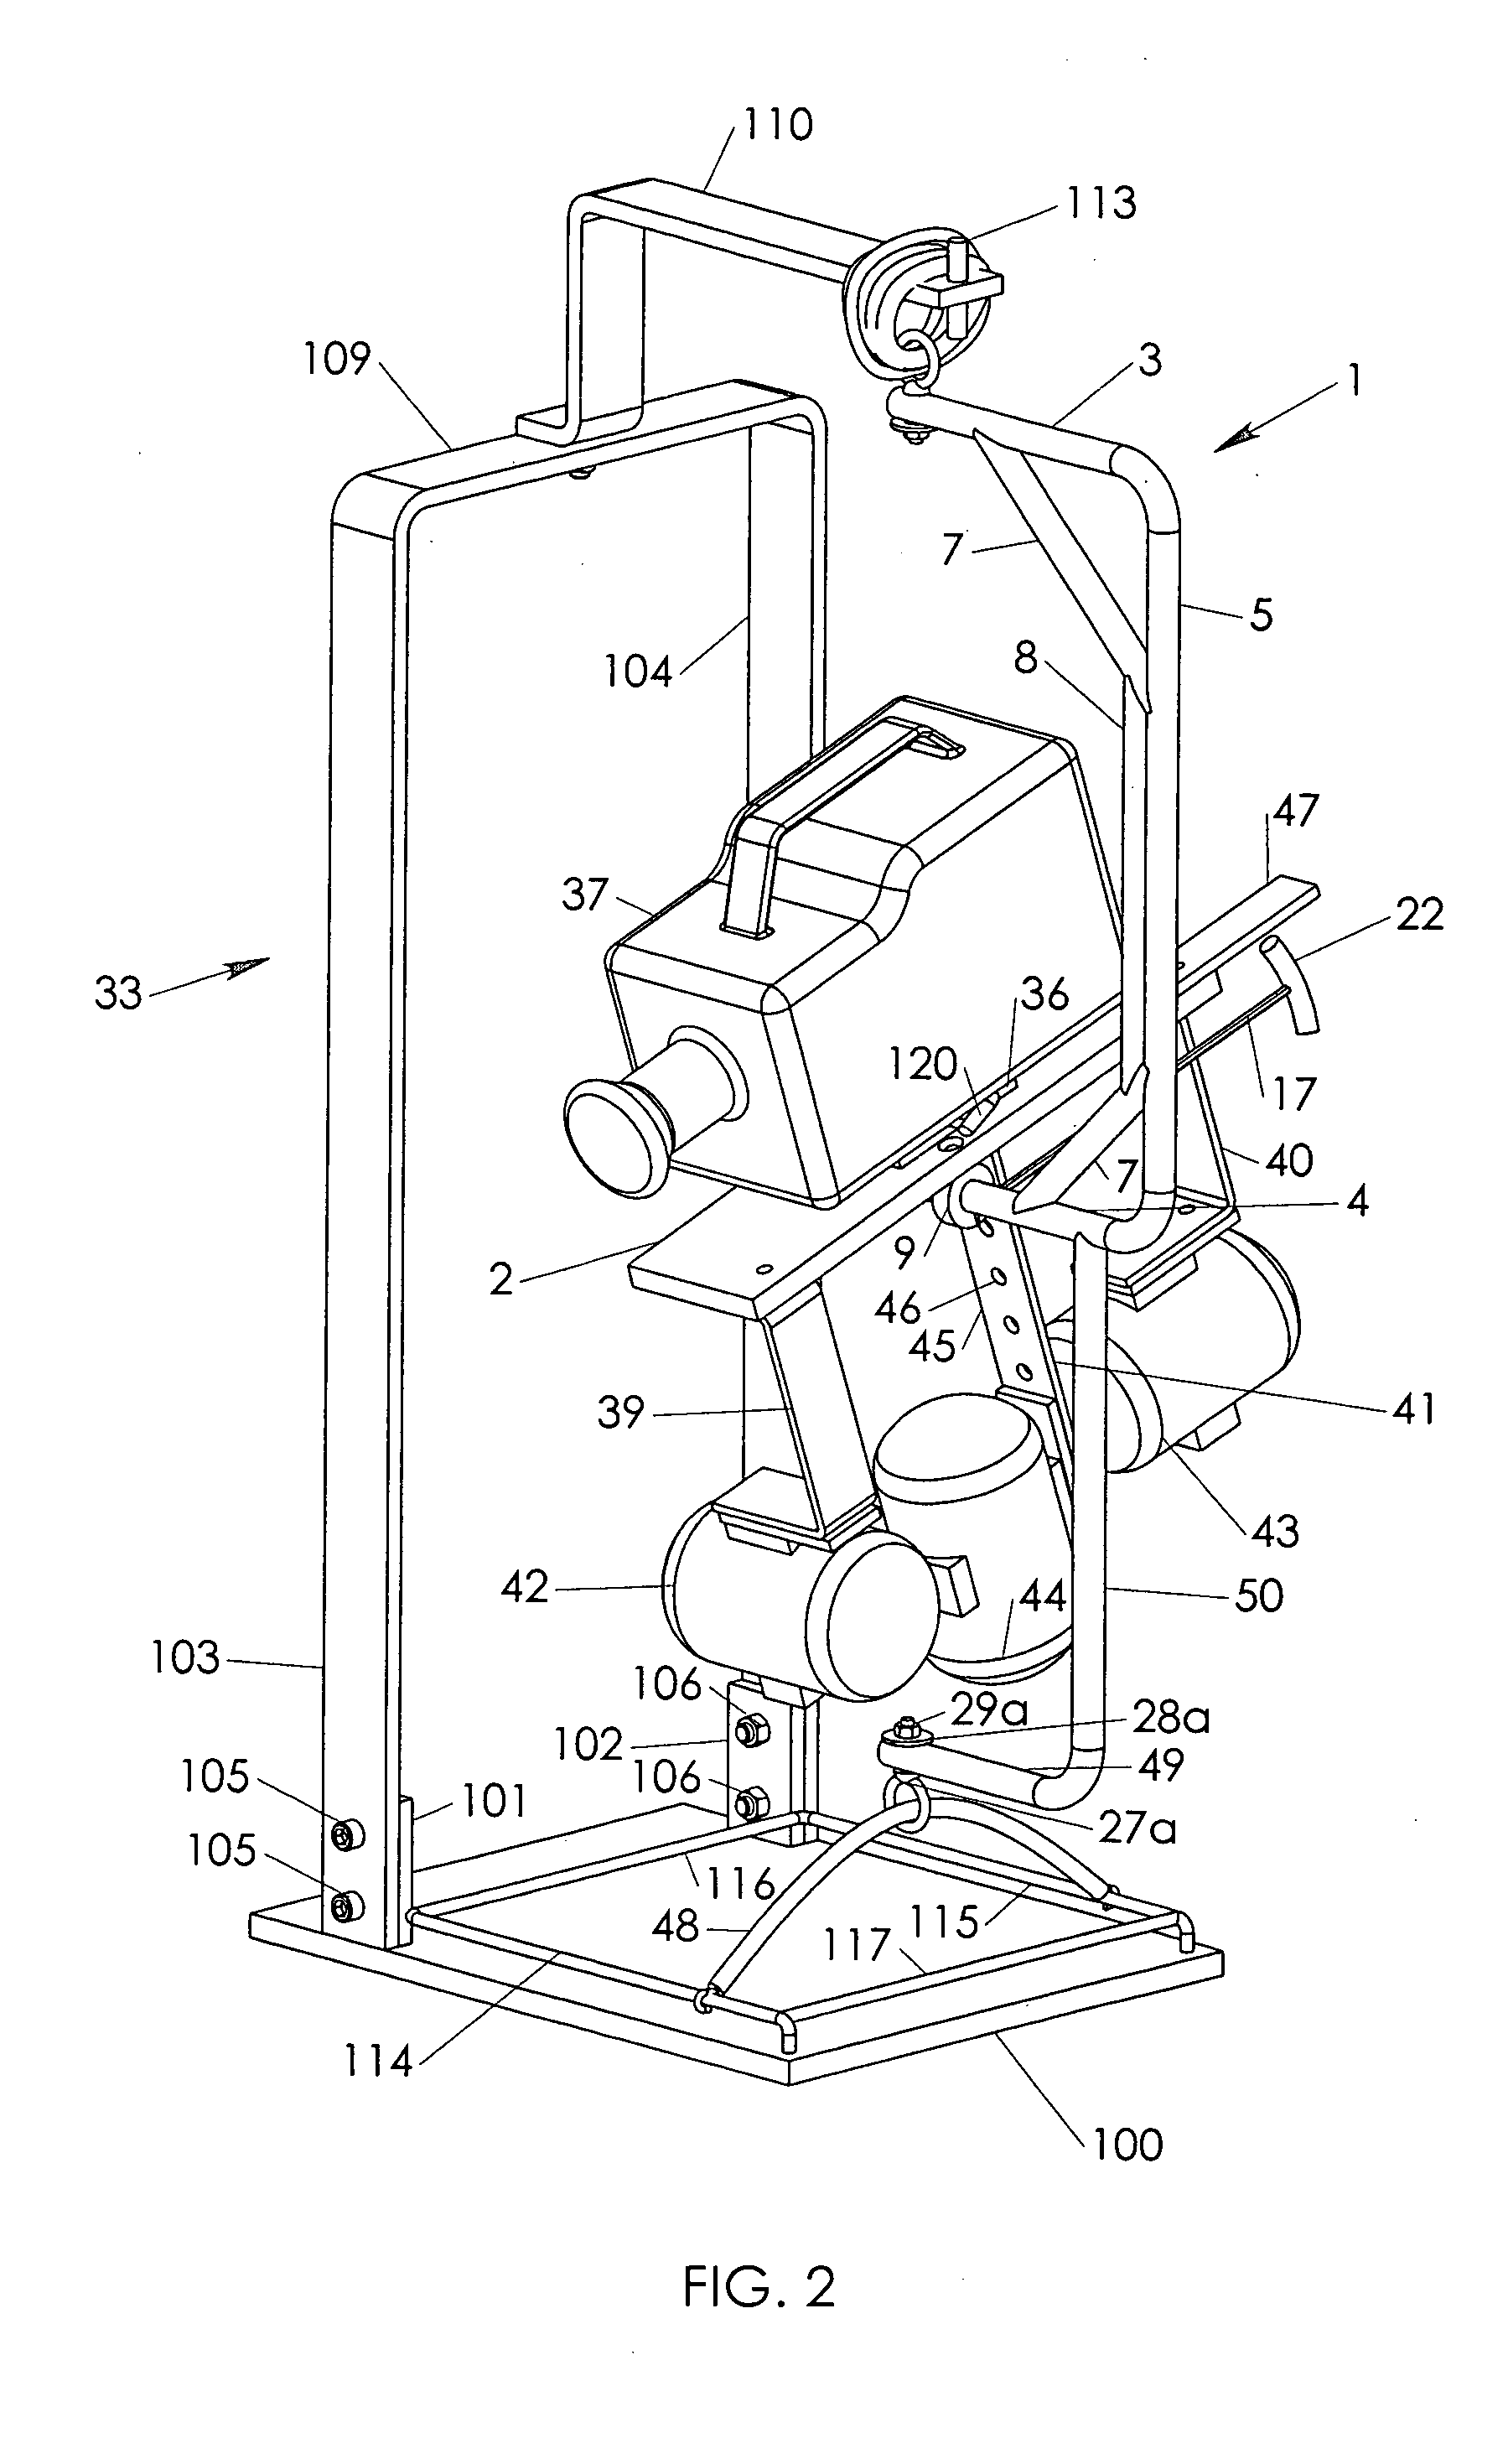 Frame assembly for supporting a camera